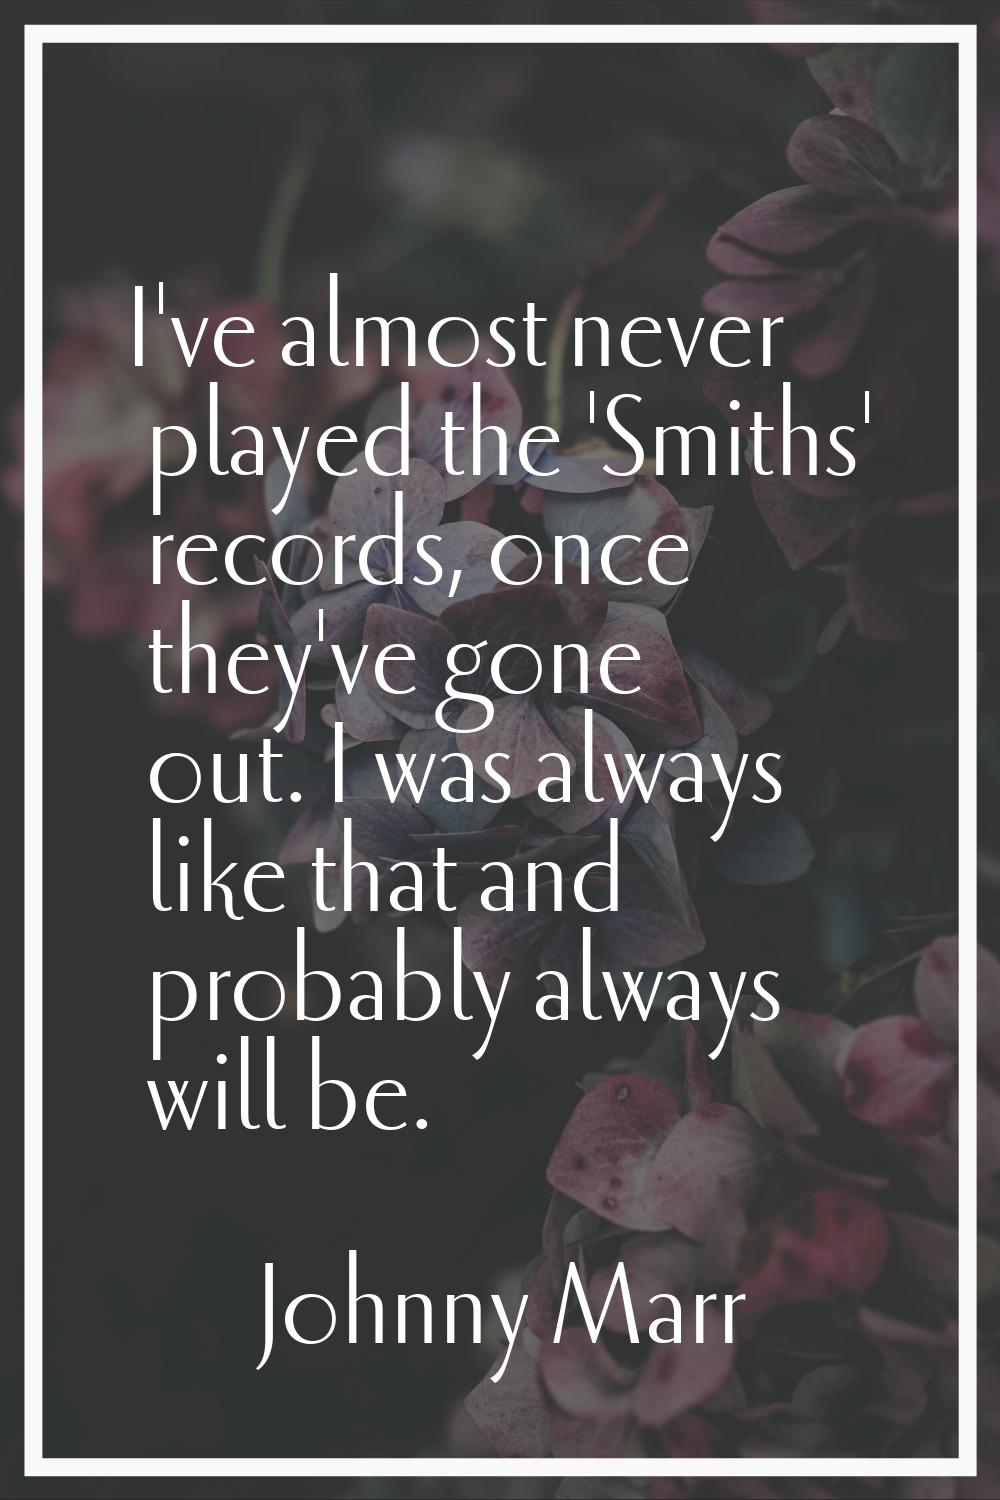 I've almost never played the 'Smiths' records, once they've gone out. I was always like that and pr